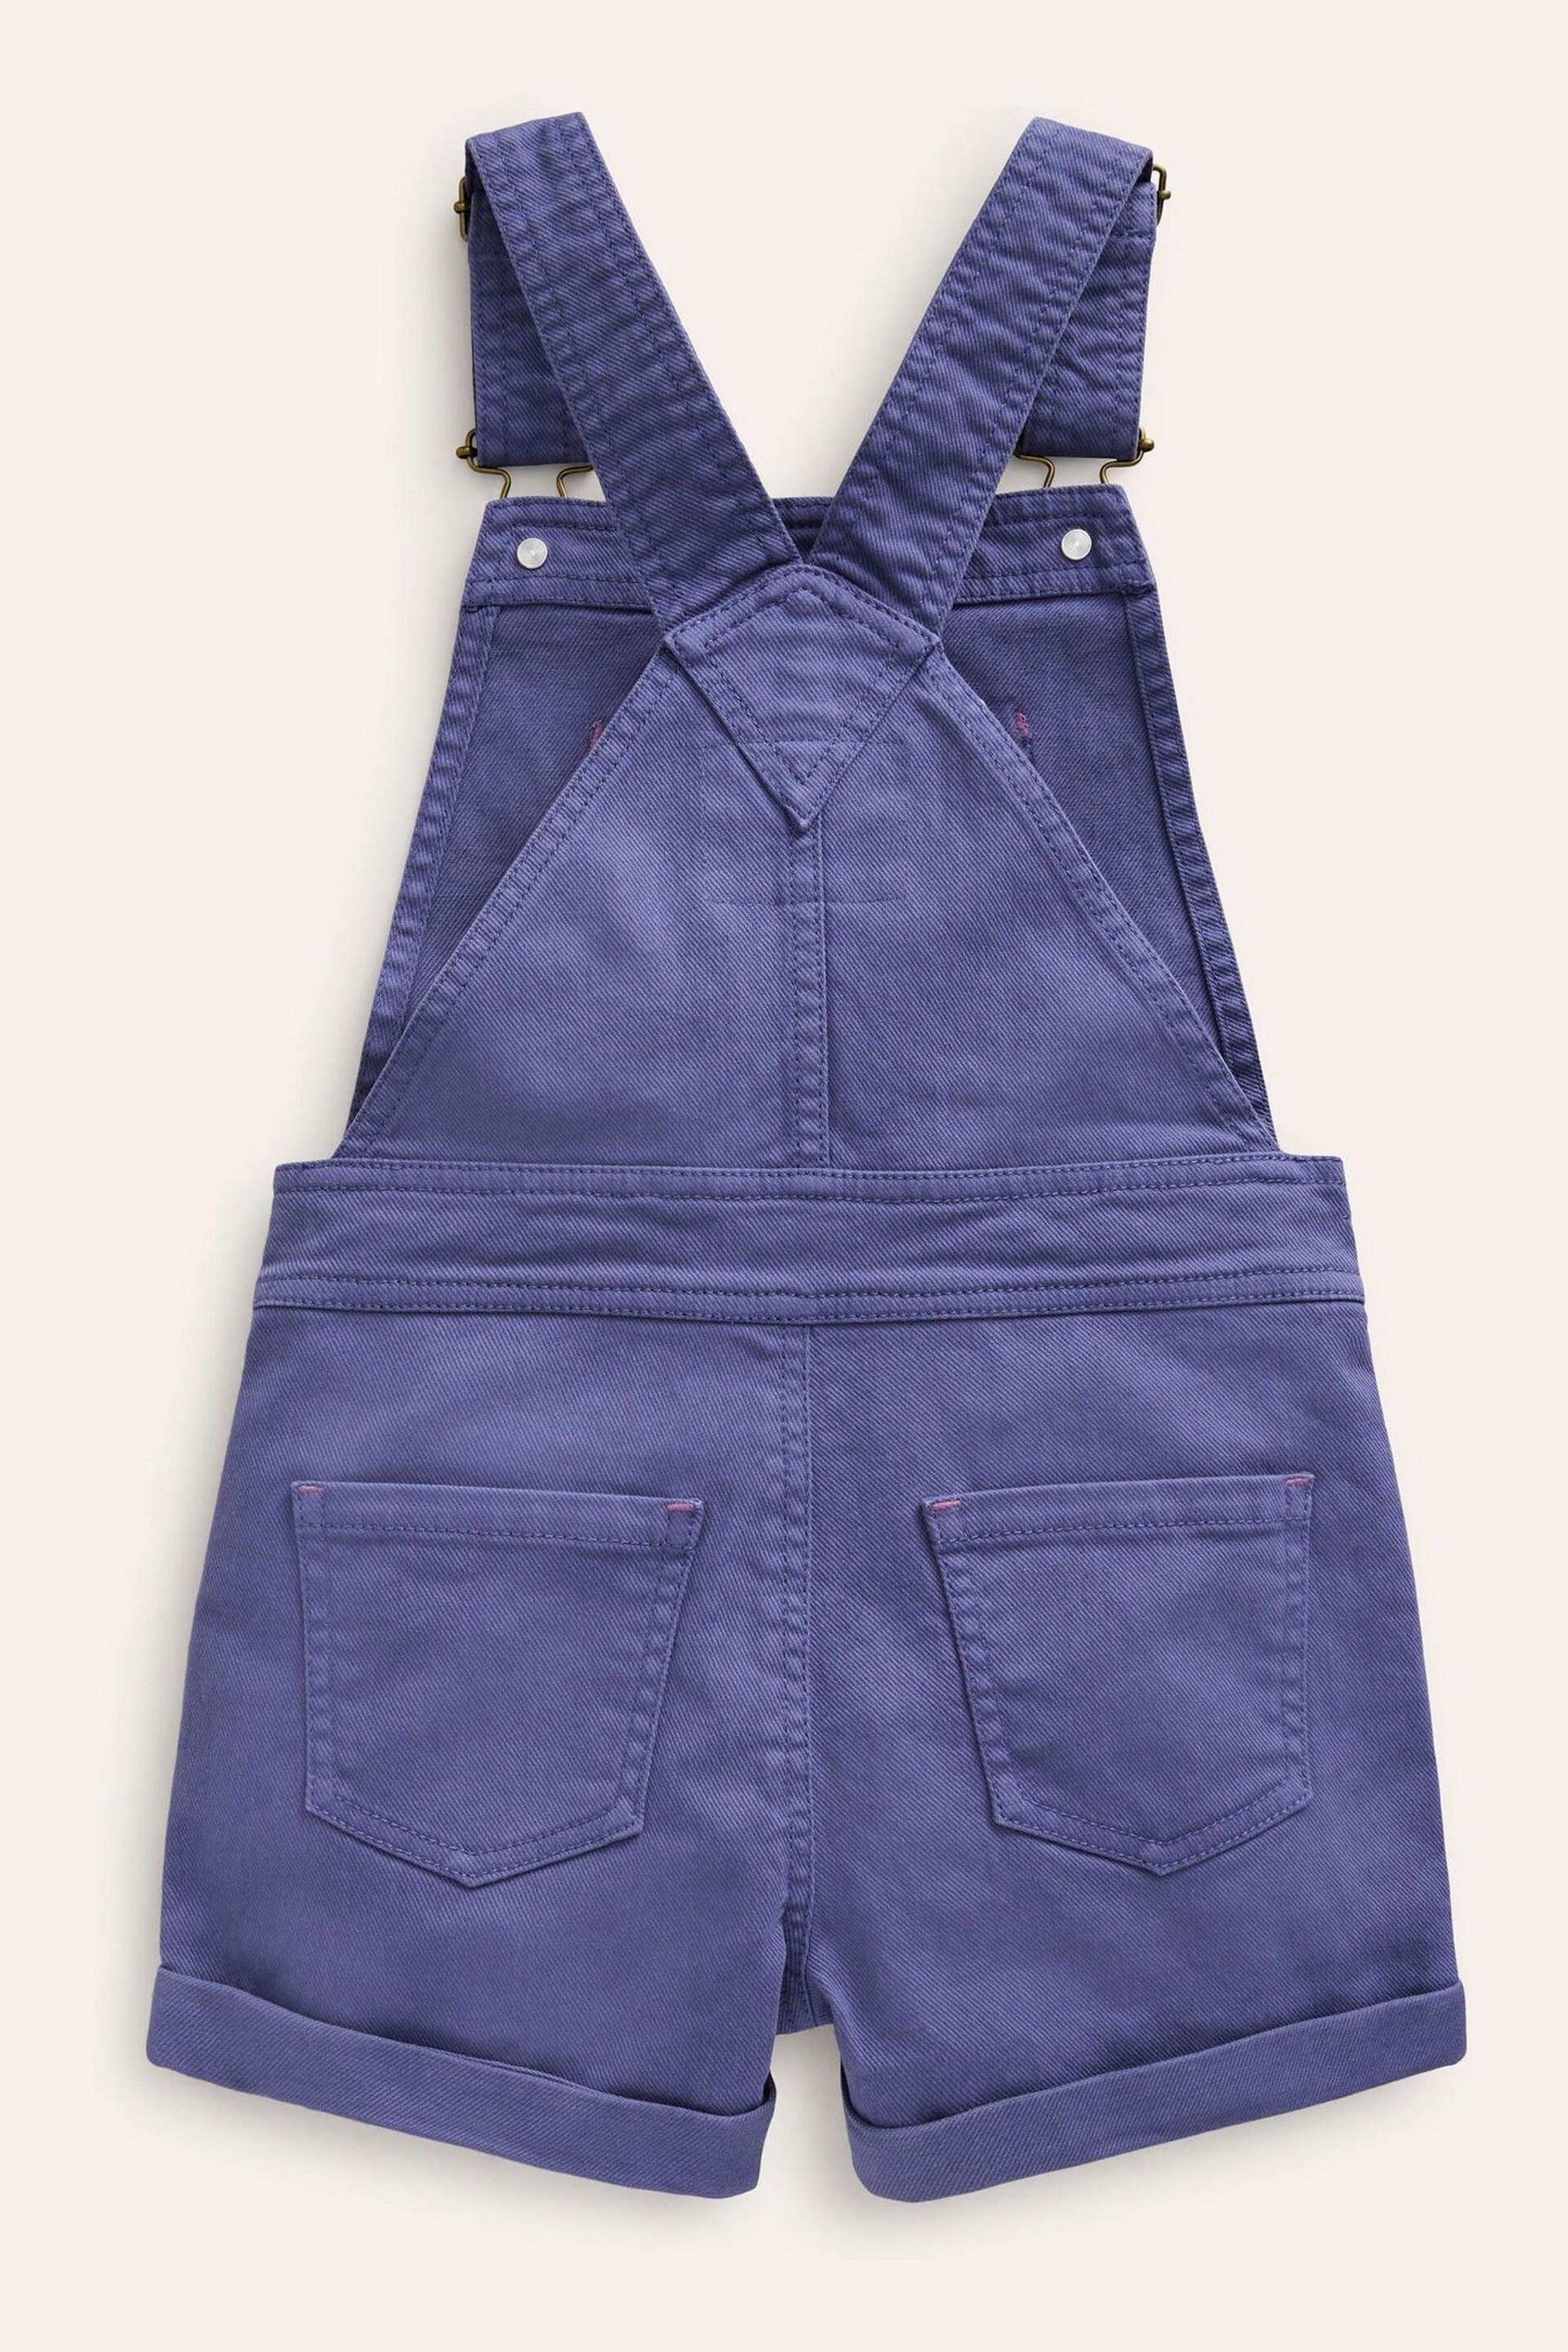 Boden Blue Cross-Back Printed Dungarees - Image 2 of 3